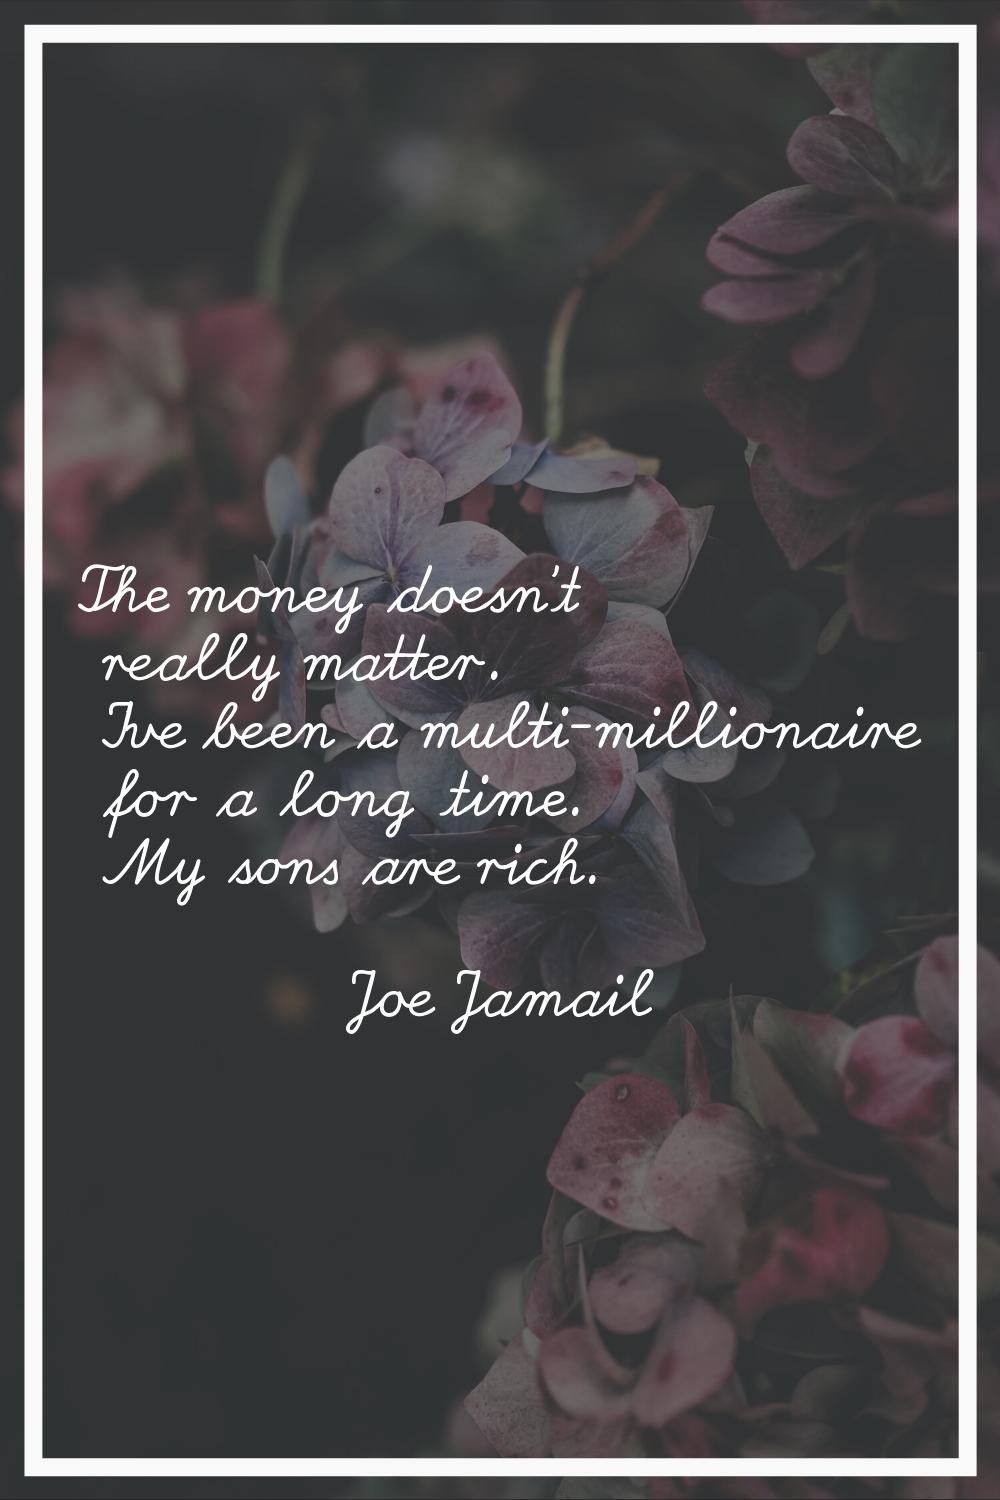 The money doesn't really matter. I've been a multi-millionaire for a long time. My sons are rich.